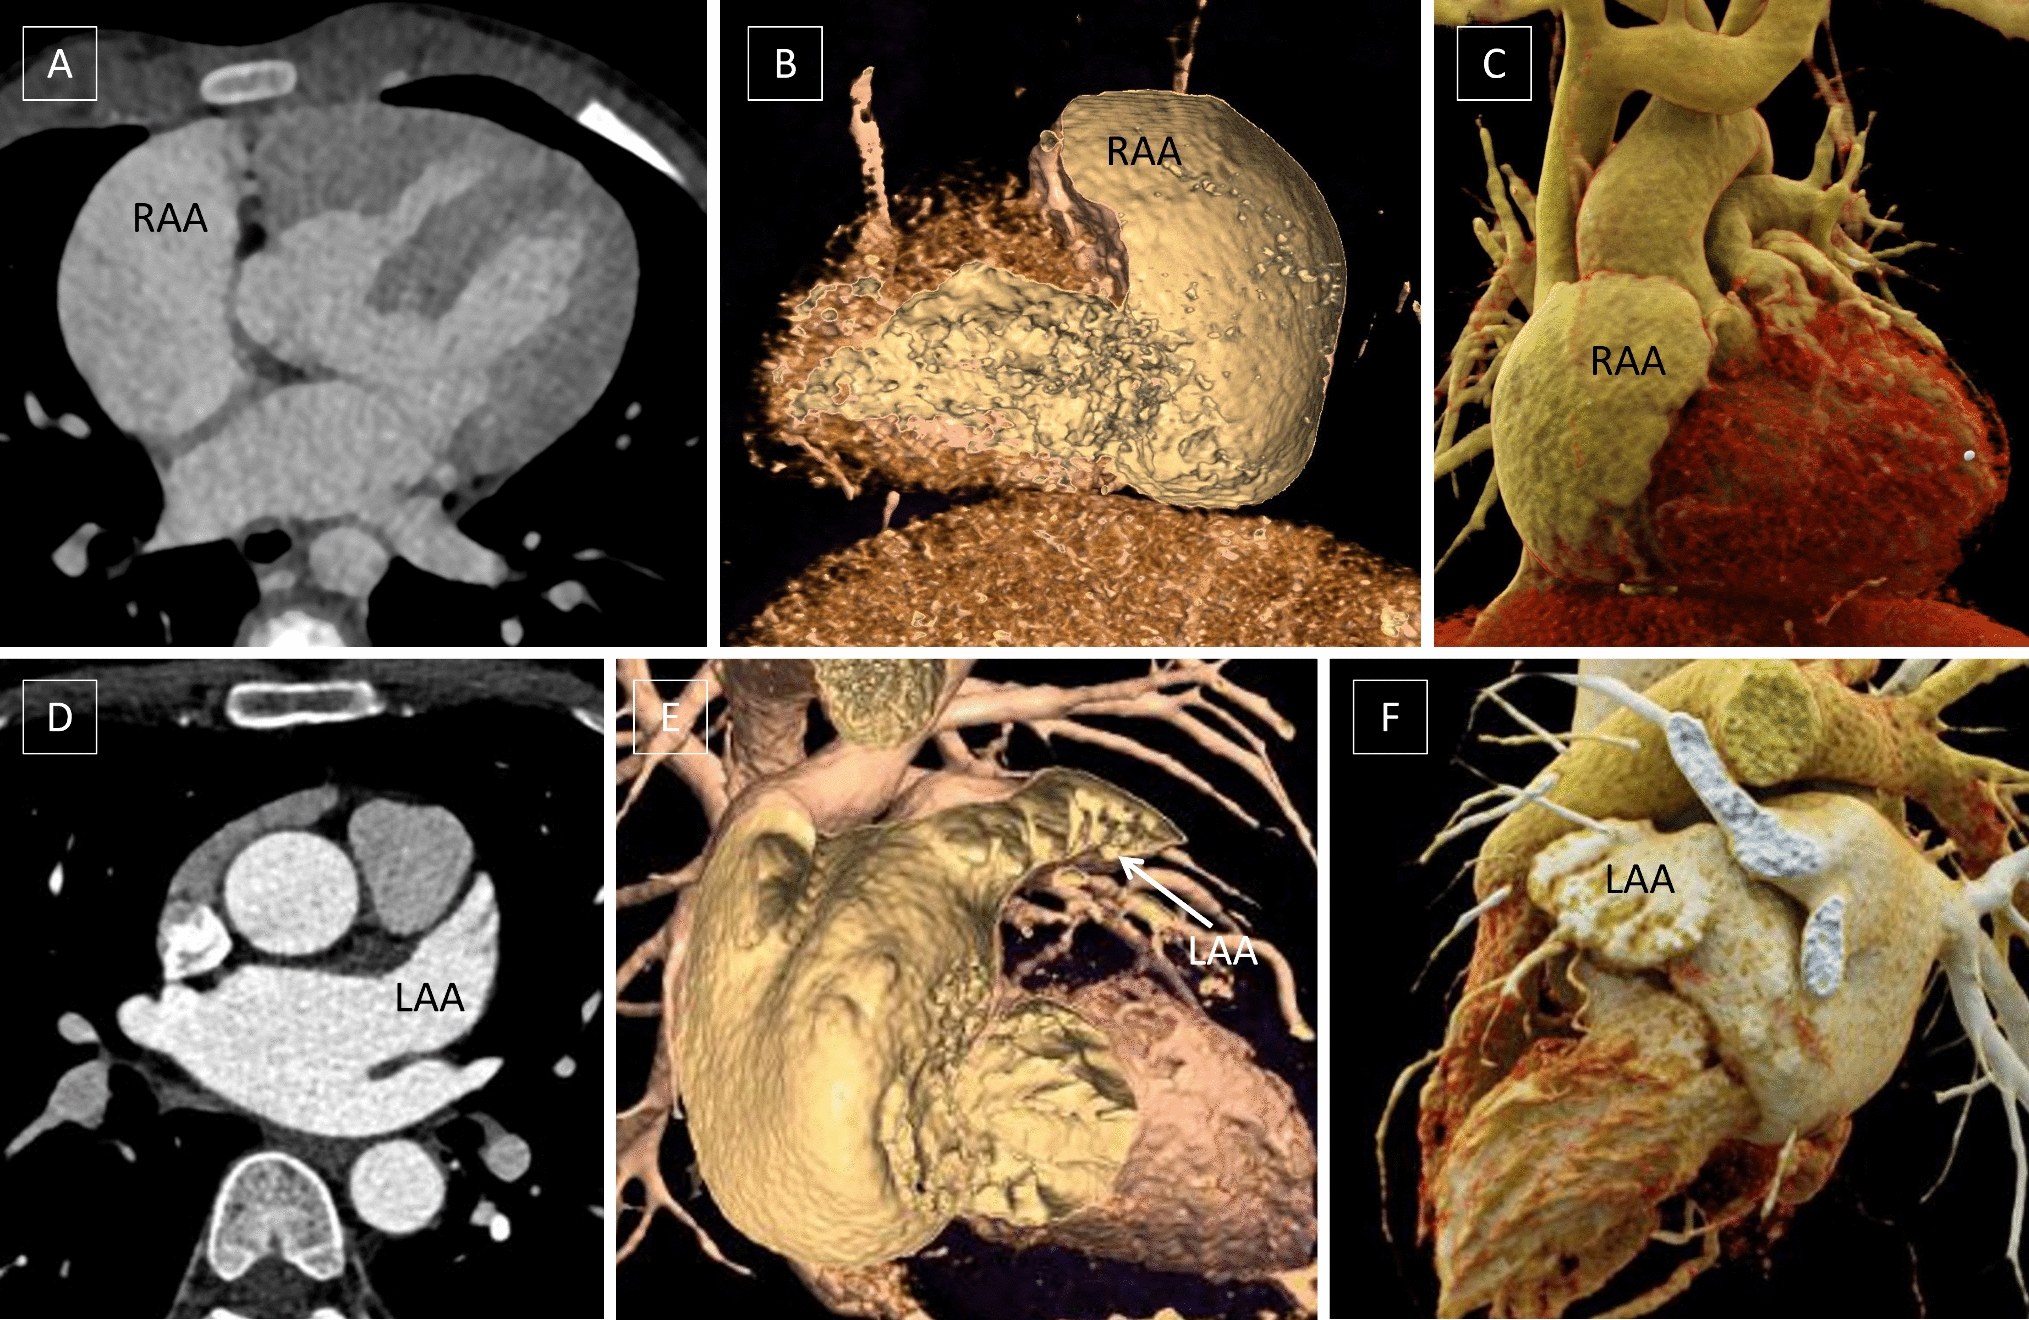 Identification and Analysis of Atrial-Bronchial-Abdominal Disharmony in Patients with Isomeric Atrial Appendages